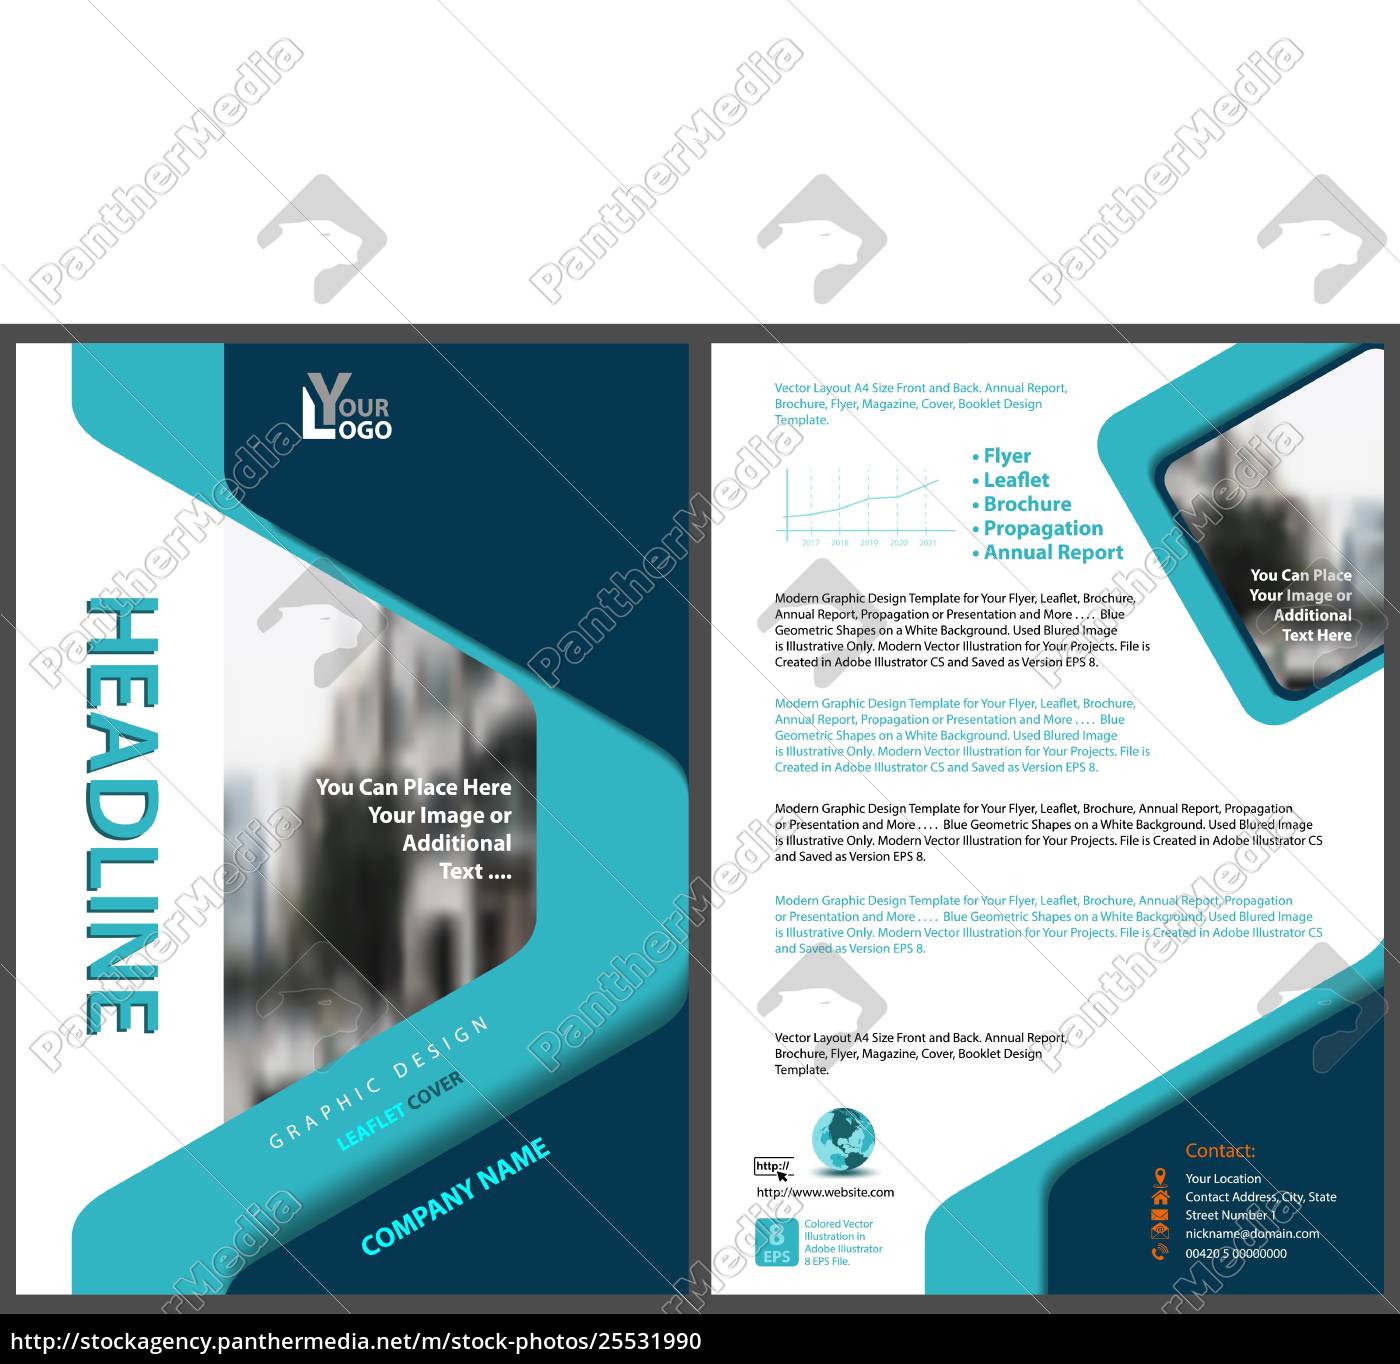 Modern Flyer Template With Geometric Design Stock Image Panthermedia Stock Agency